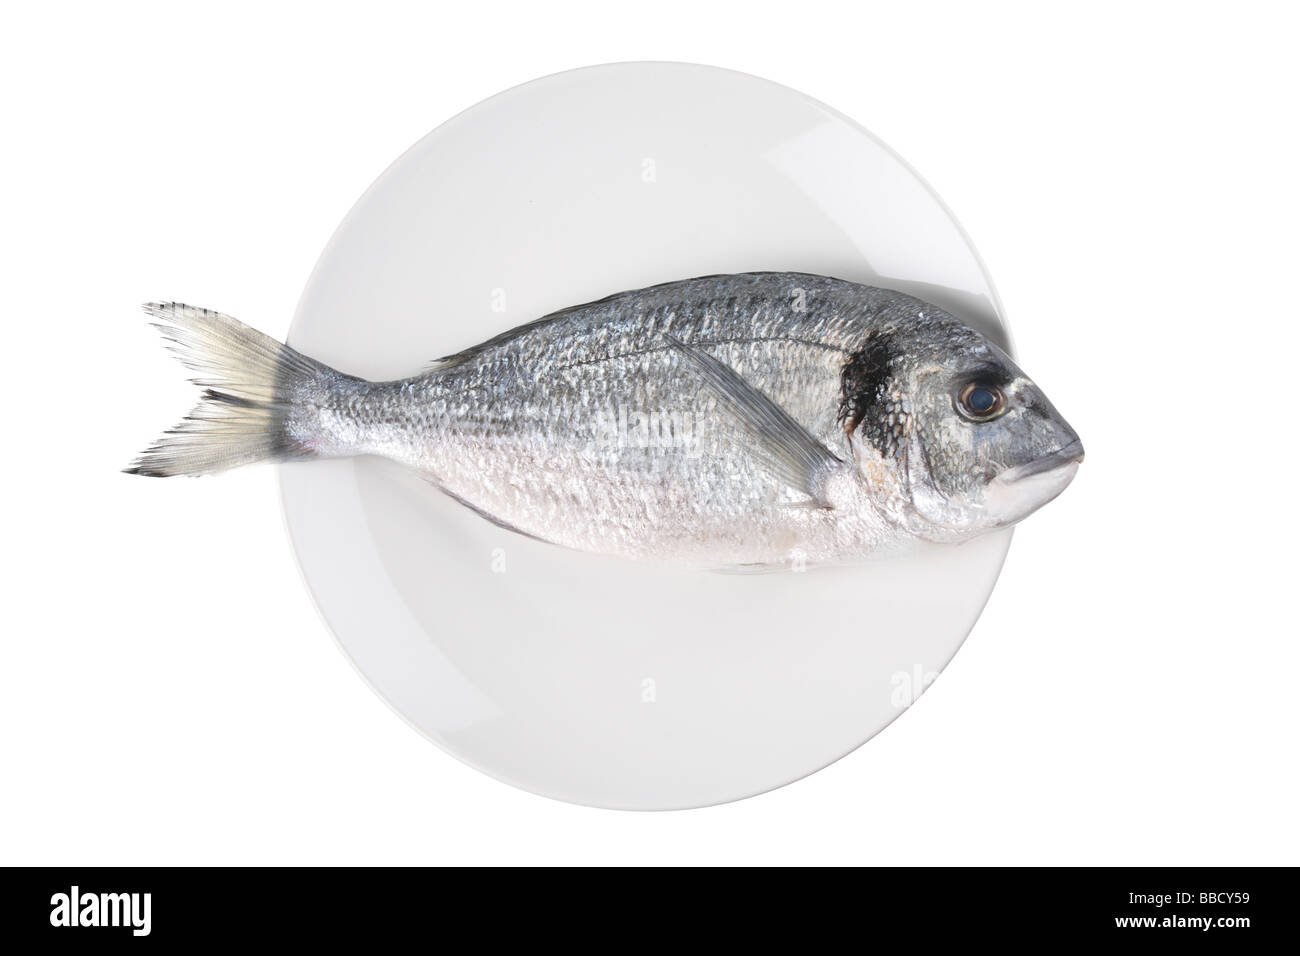 Uncooked fish (sparus auratus)on a plate isolated against white background Stock Photo